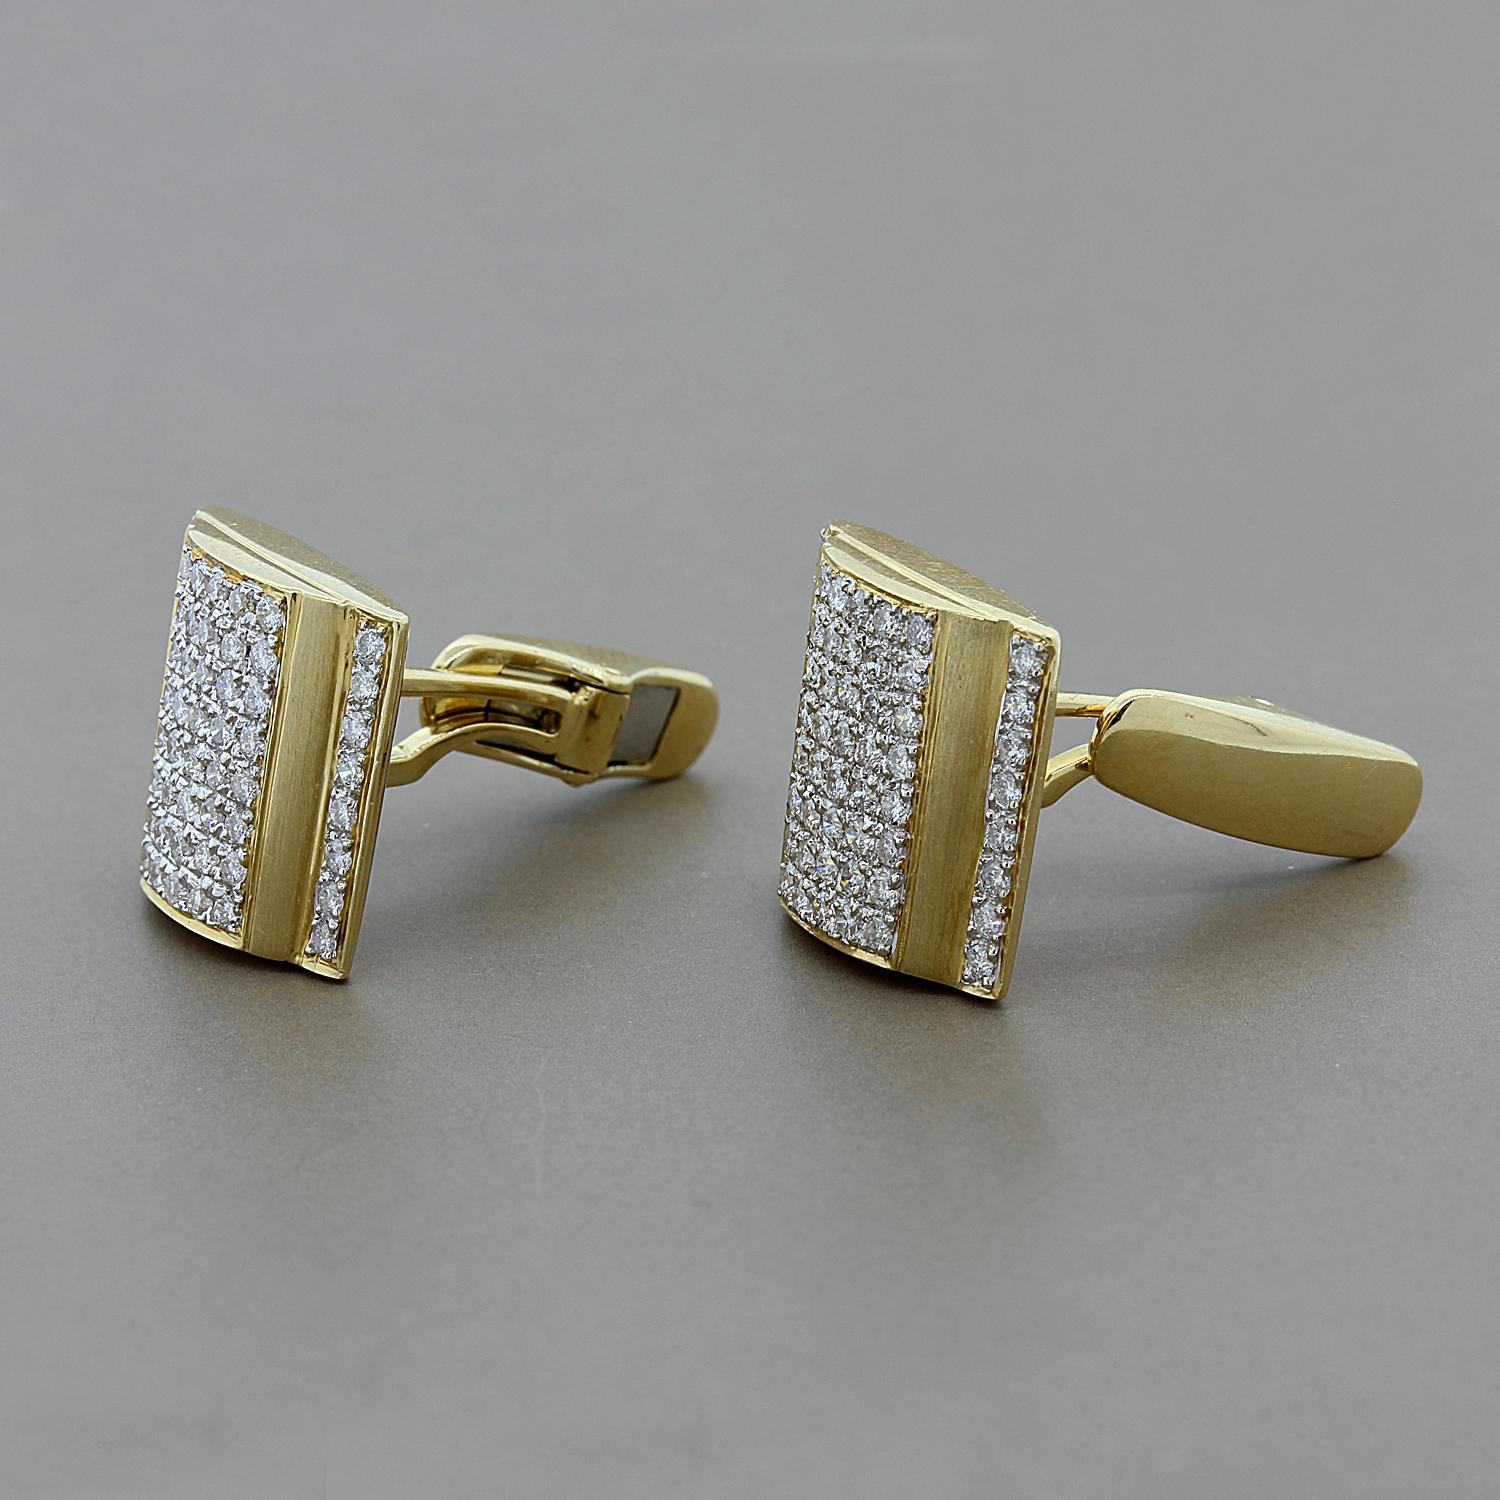 A pair of cufflinks featuring 1.30 carats of diamonds on a panel of 14K yellow gold.